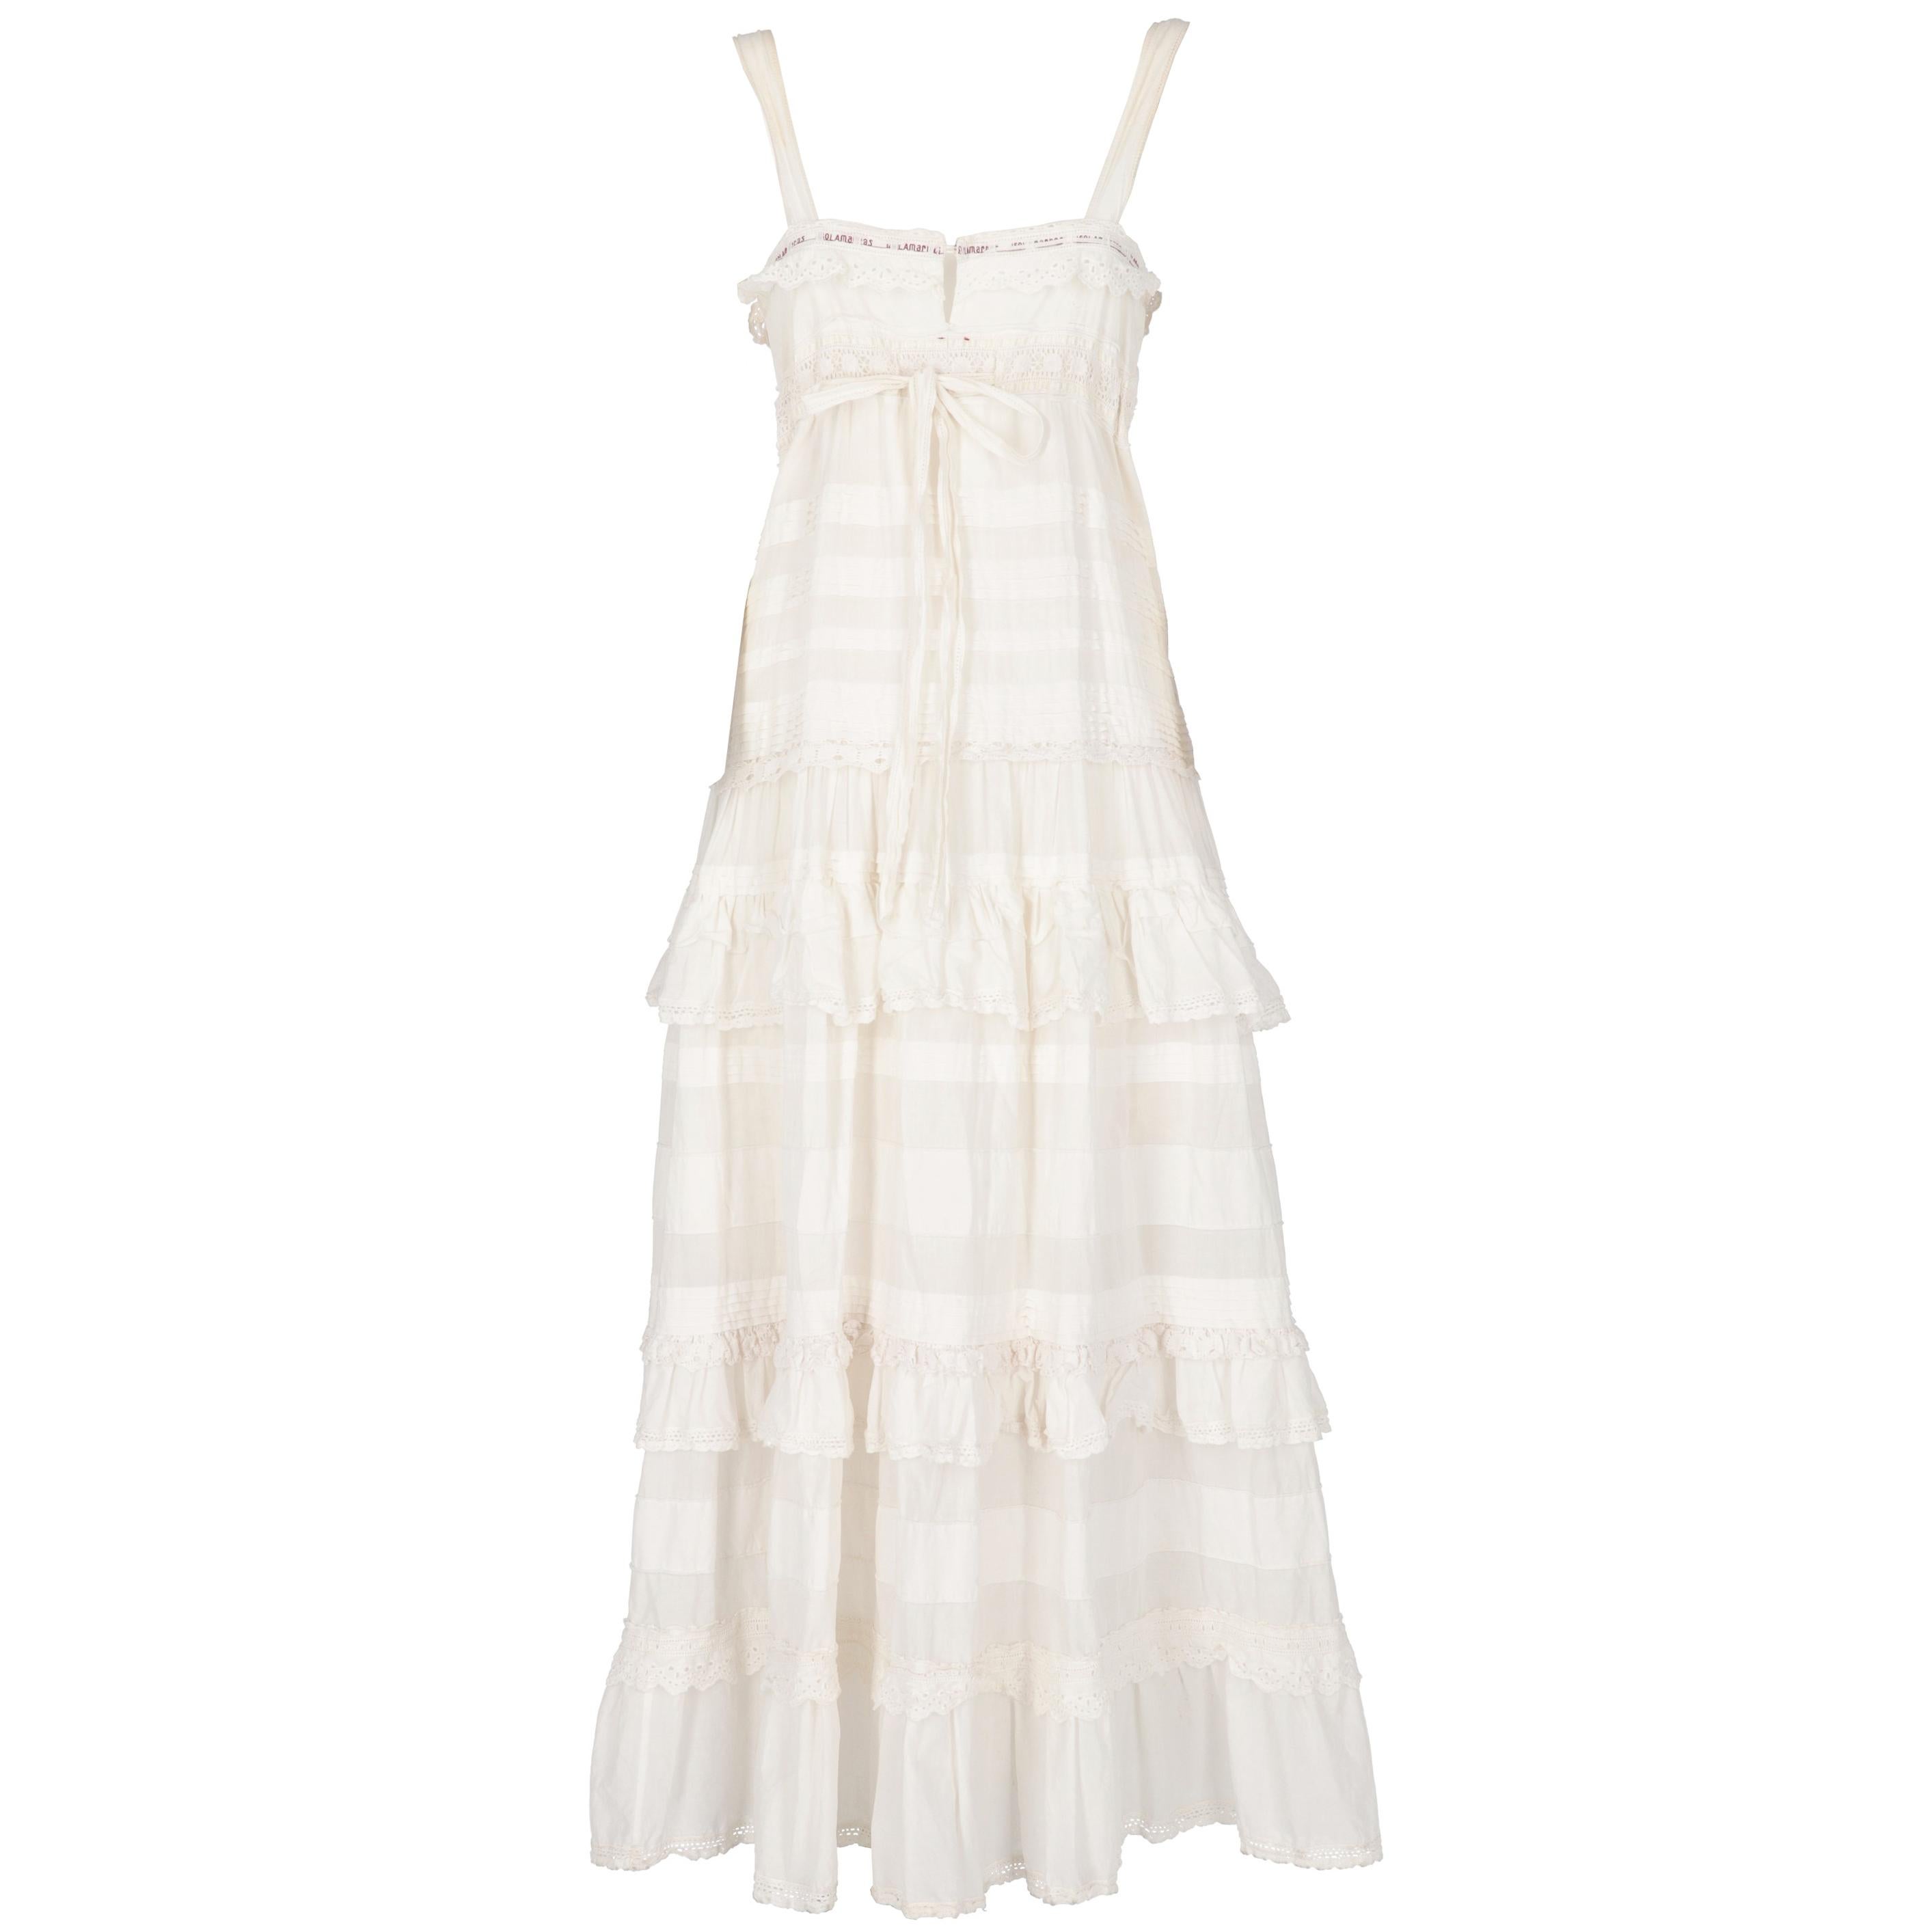 The lovely I'm Isola Marras by Antonio Marras white cotton long dress with shoulder straps features a zip and button front fastening, an original red embroidered branded drawstring on the chest and pleated inserts with crochet laces on the top. The